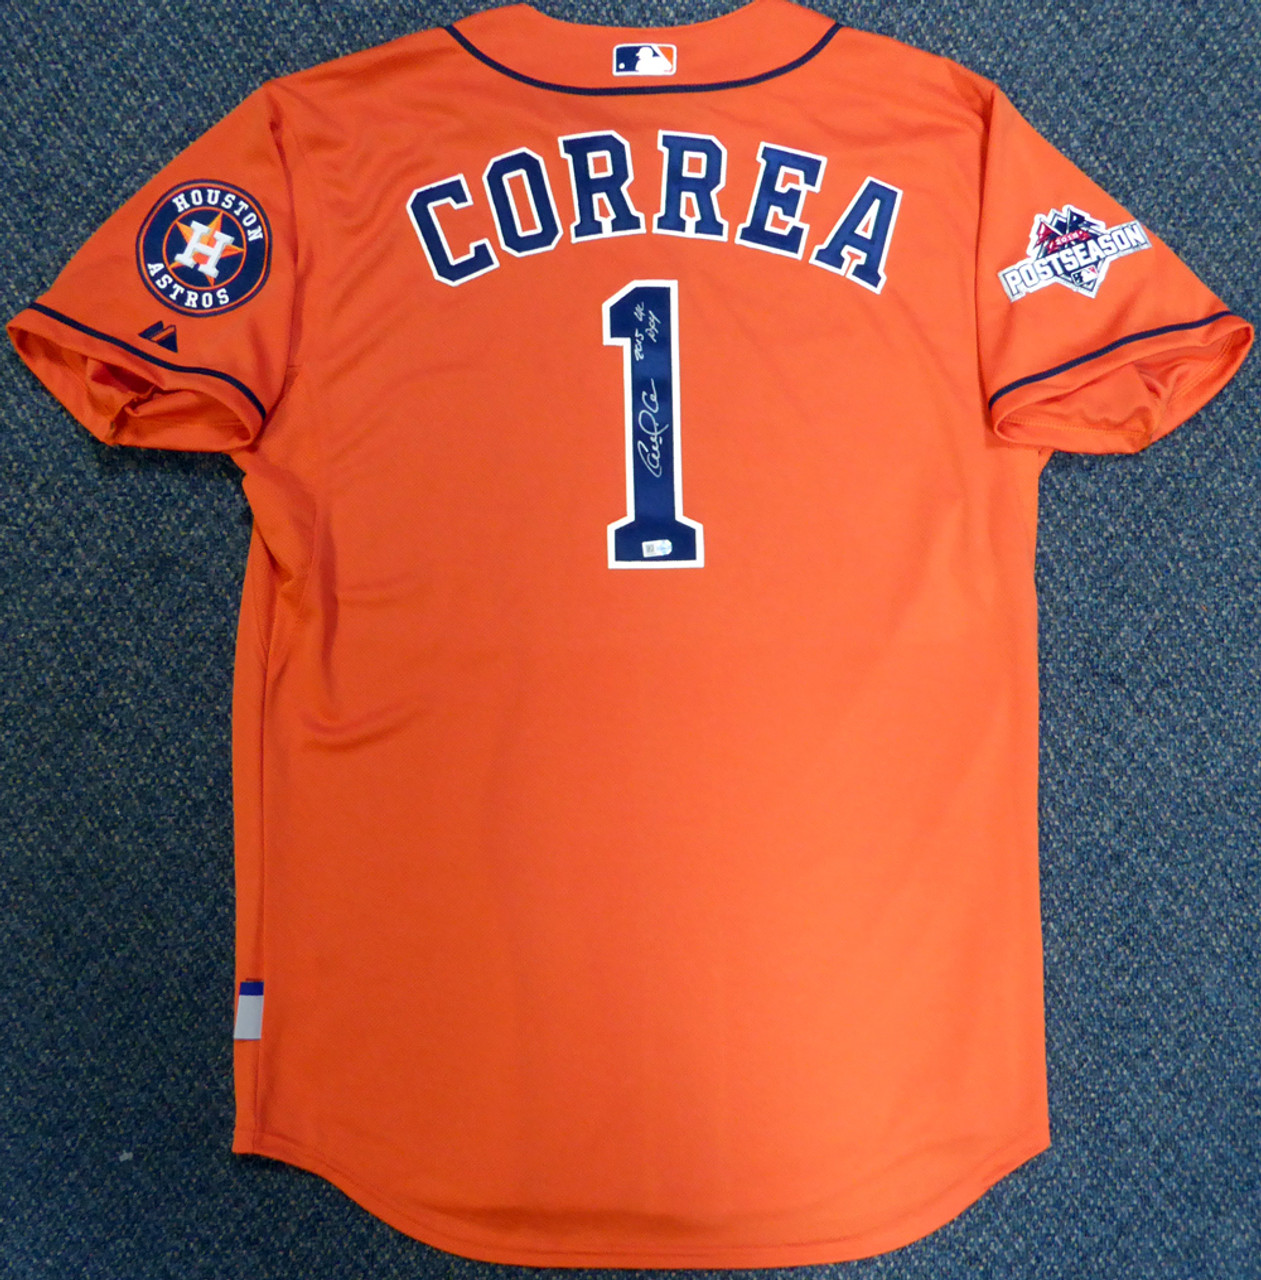 Carlos Correa Pro Debut 2012 Game Used GCL Houston Astros Jersey MLB